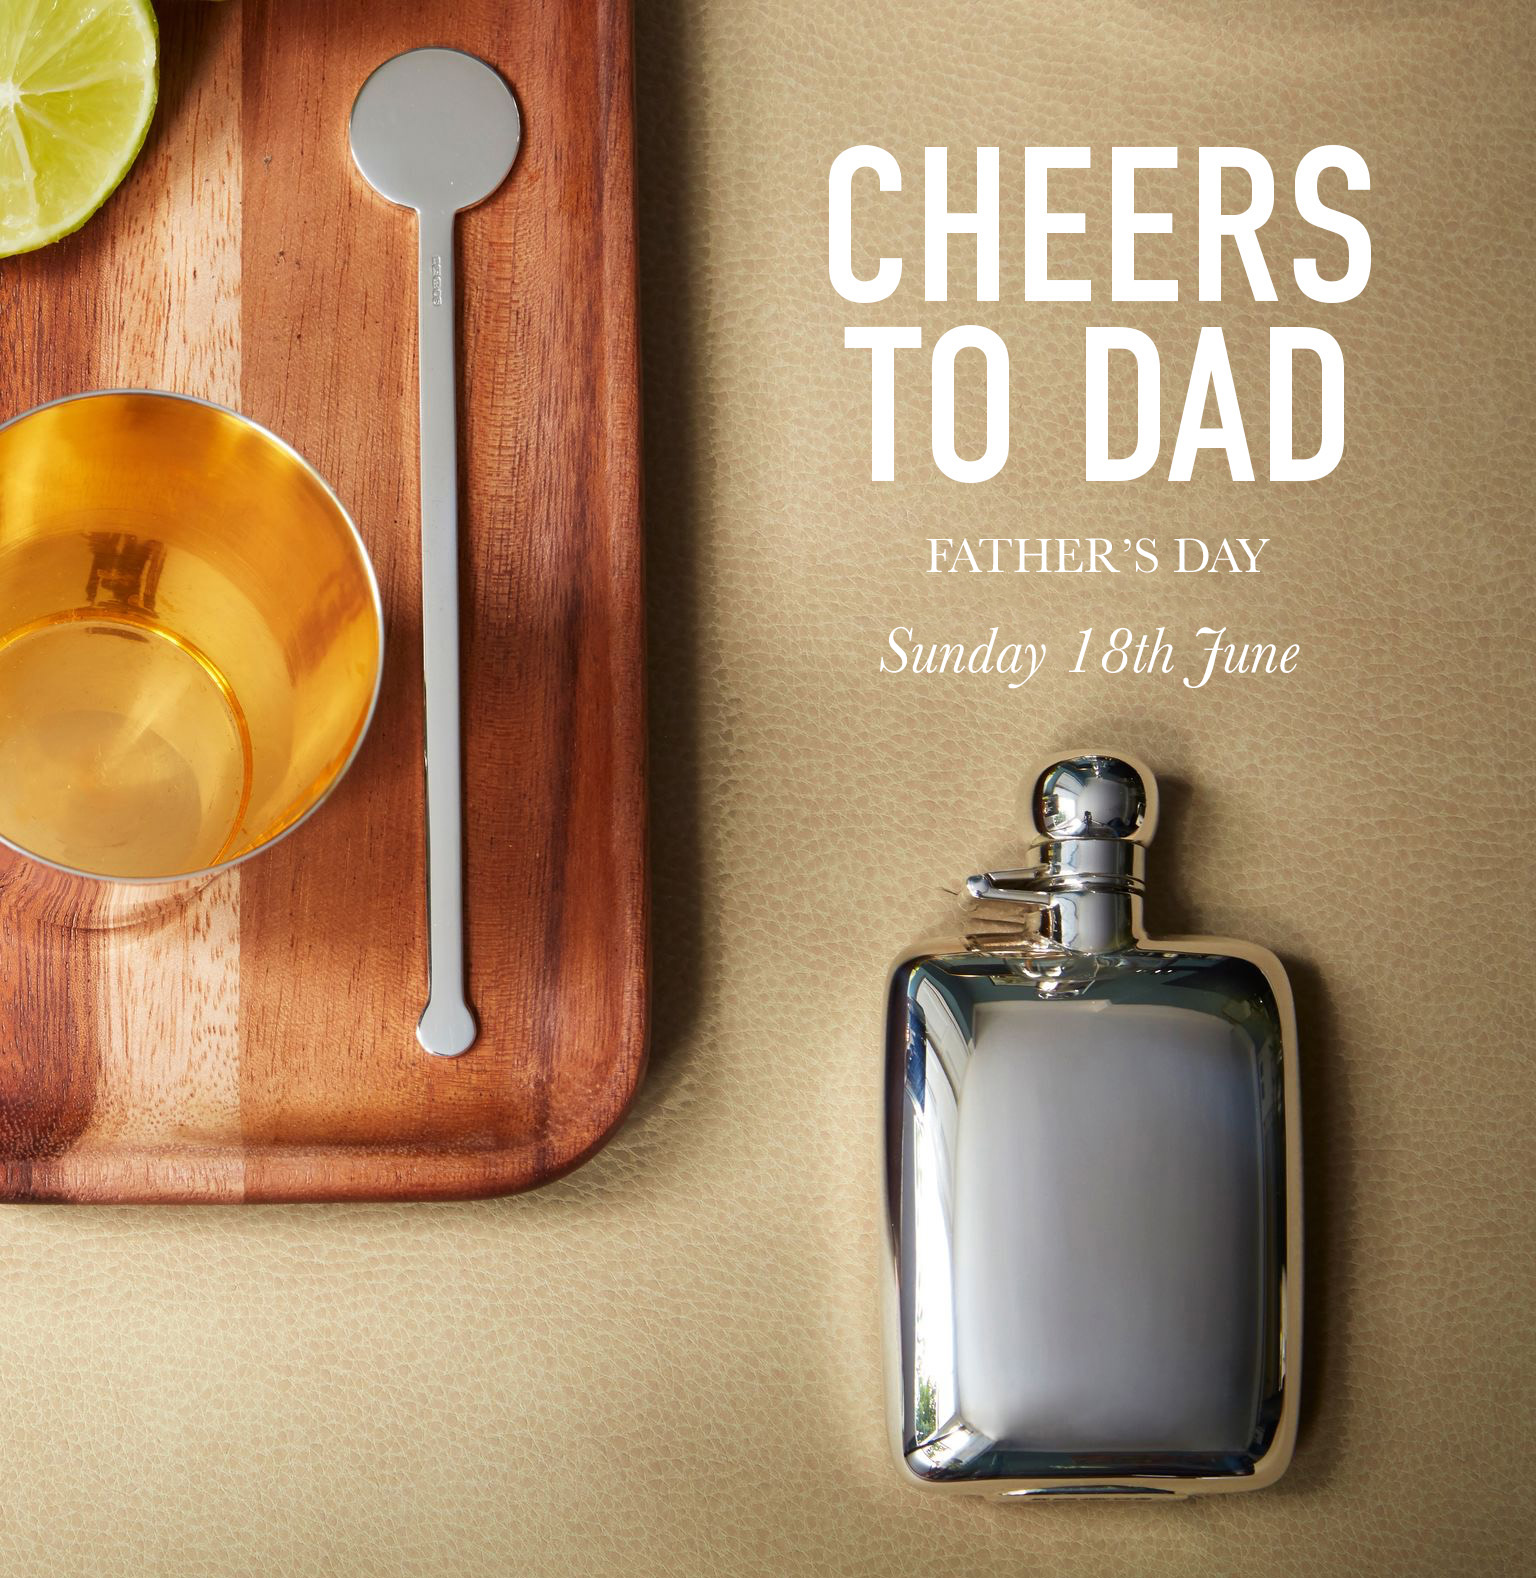 Hersey & Son Discount Code 10% OFF CHEERS TO DAD!